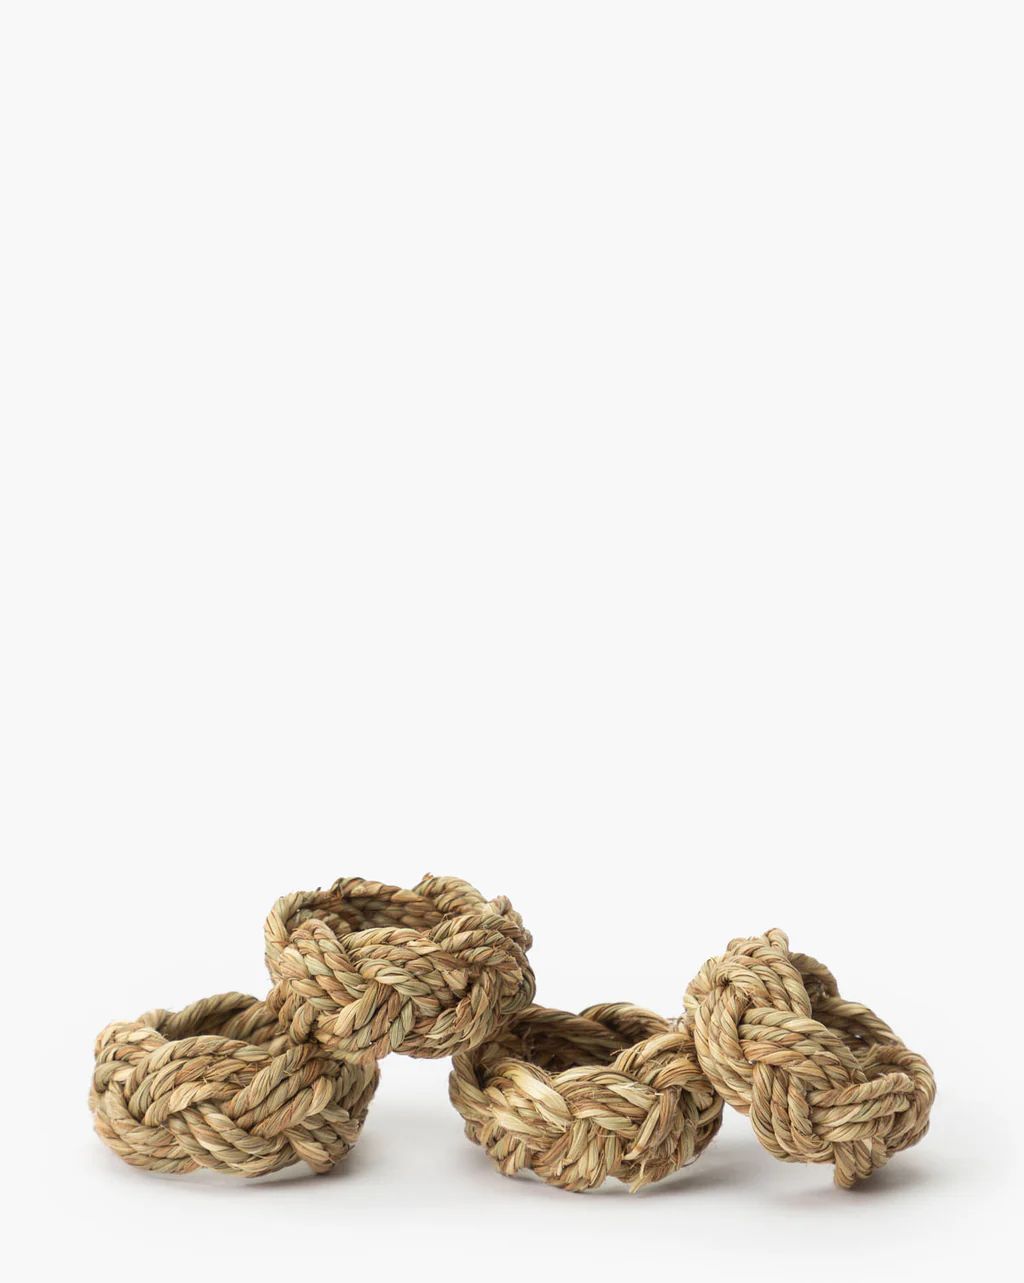 Braided Seagrass Napkin Rings (Set of 4) | McGee & Co.